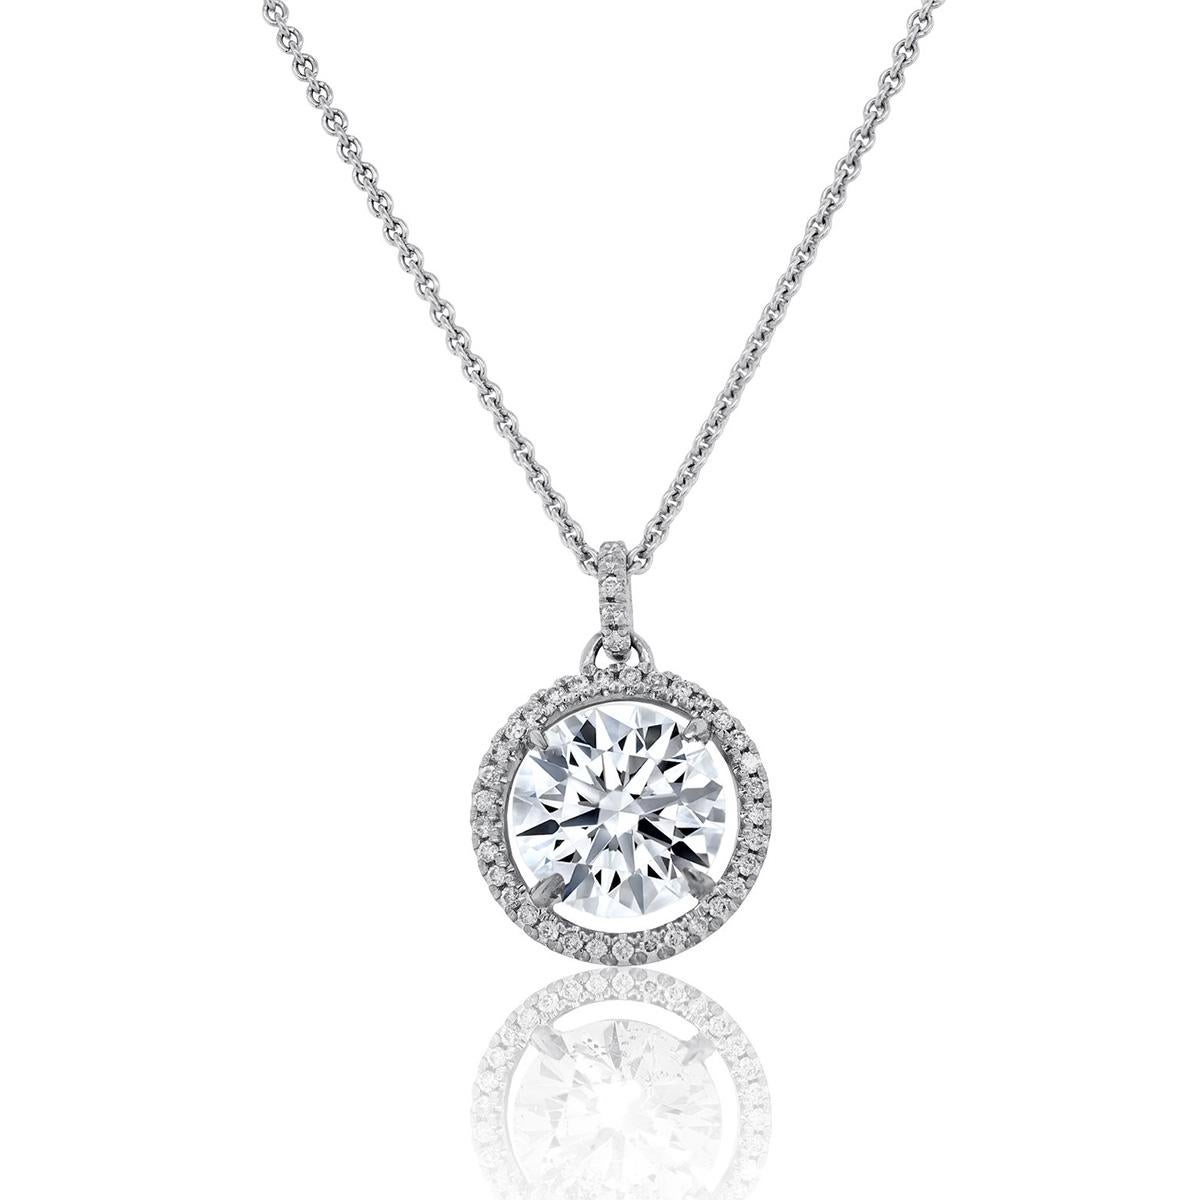 18KT WHITE GOLD DIAMOND PENDANT WITH CENTER 2.16CT ROUND J SI DIAMOND SET IN DIAMOND BEZEL SETTING WITH .25CT DIAMONDS IN HALO AND WHITE GOLD CHAIN.
Diana M. is a leading supplier of top-quality fine jewelry for over 35 years.
Diana M is one-stop